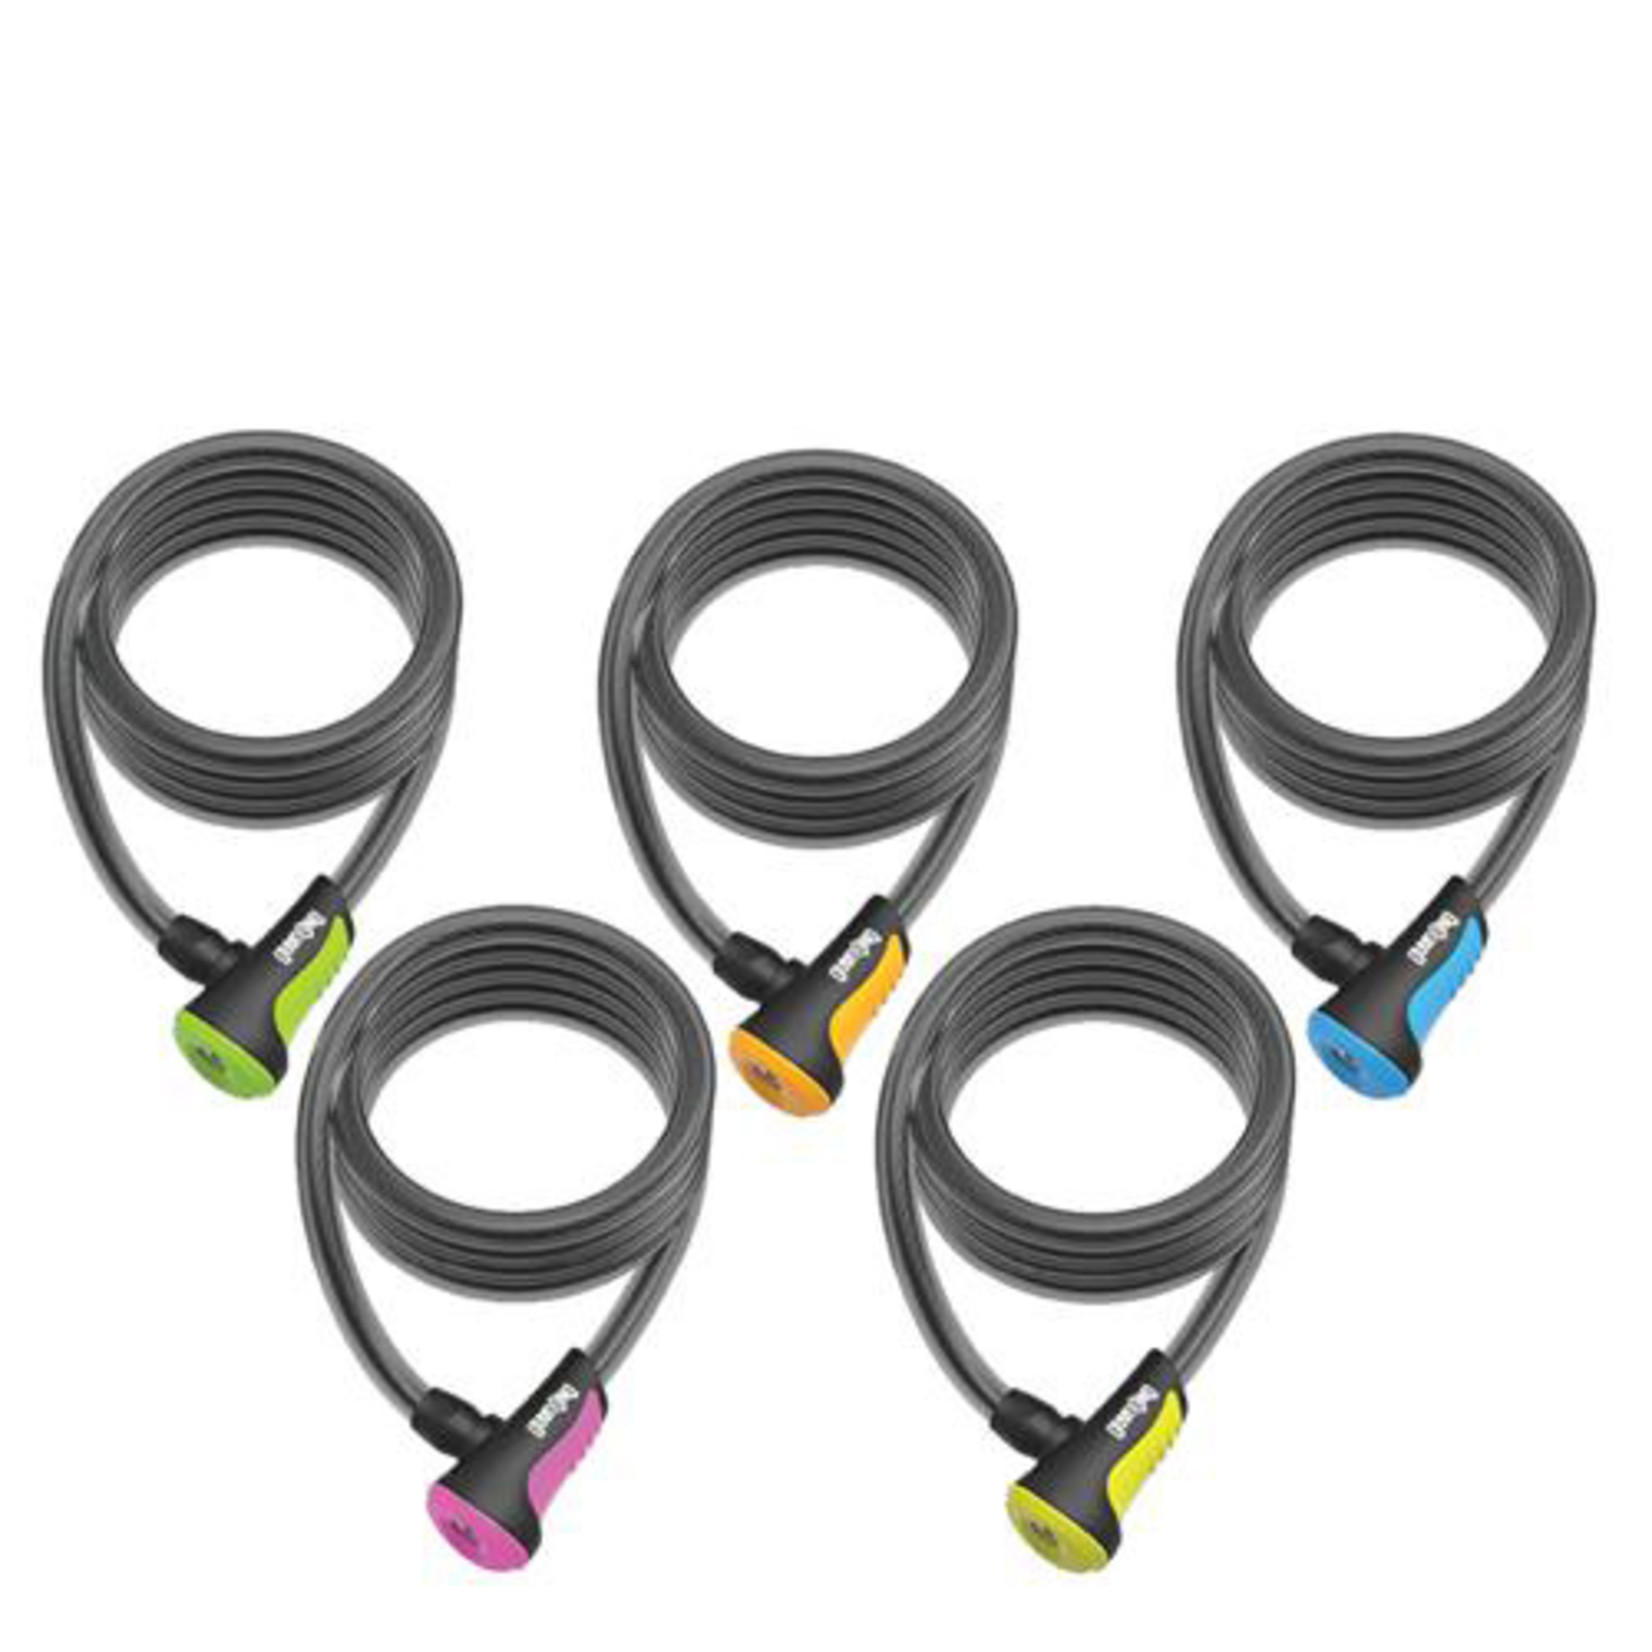 Lock On Onguard Bike Lock - Neon Series - Coiled Cable Keyed Lock - 120cm X 8mm